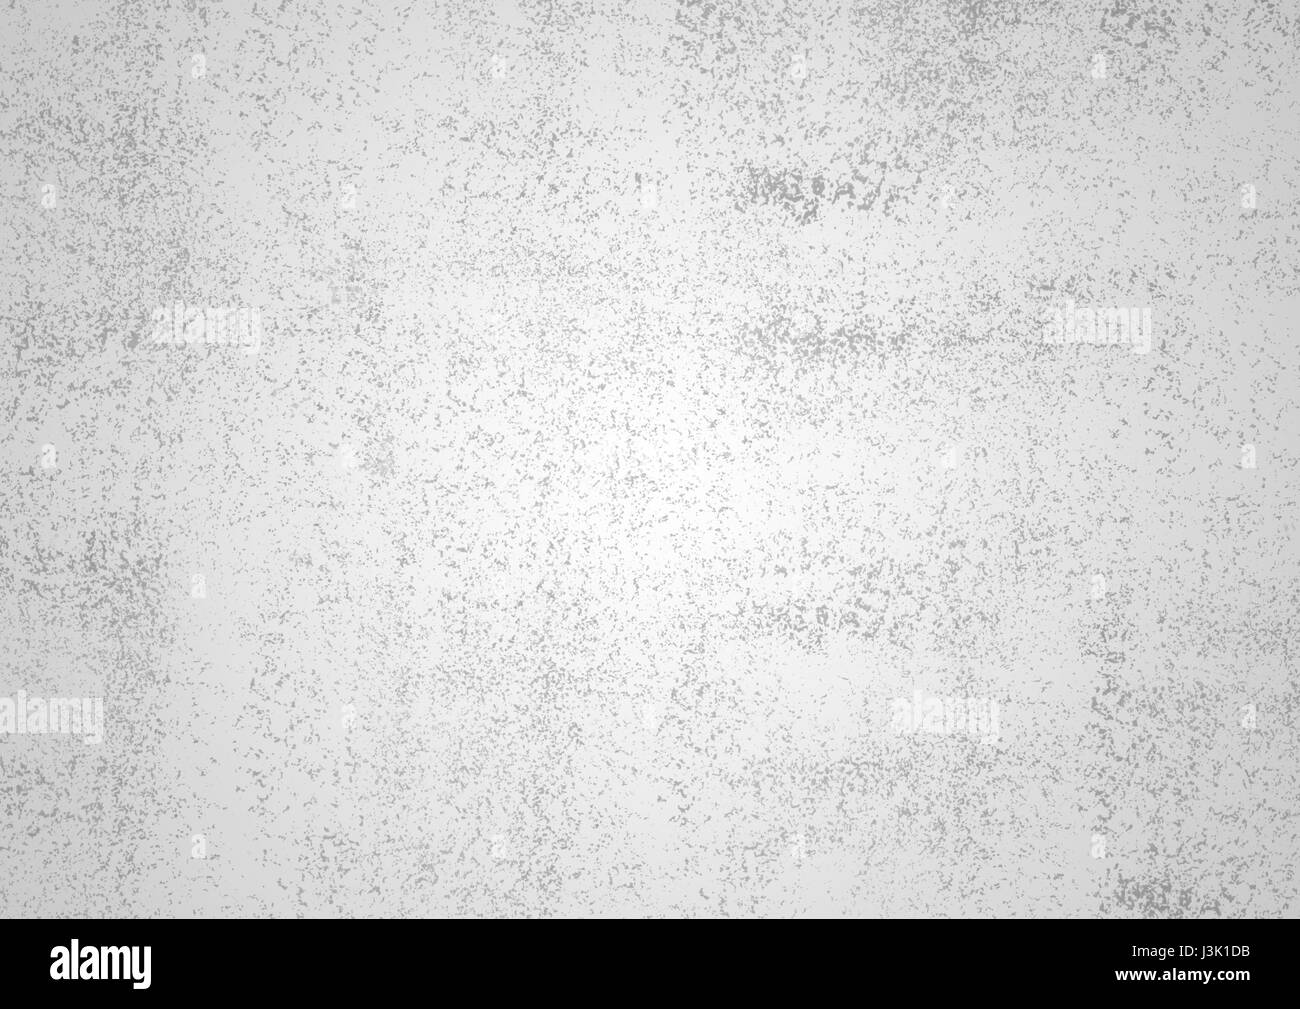 Grunge textured light background. Beautiful abstract background Stock Photo